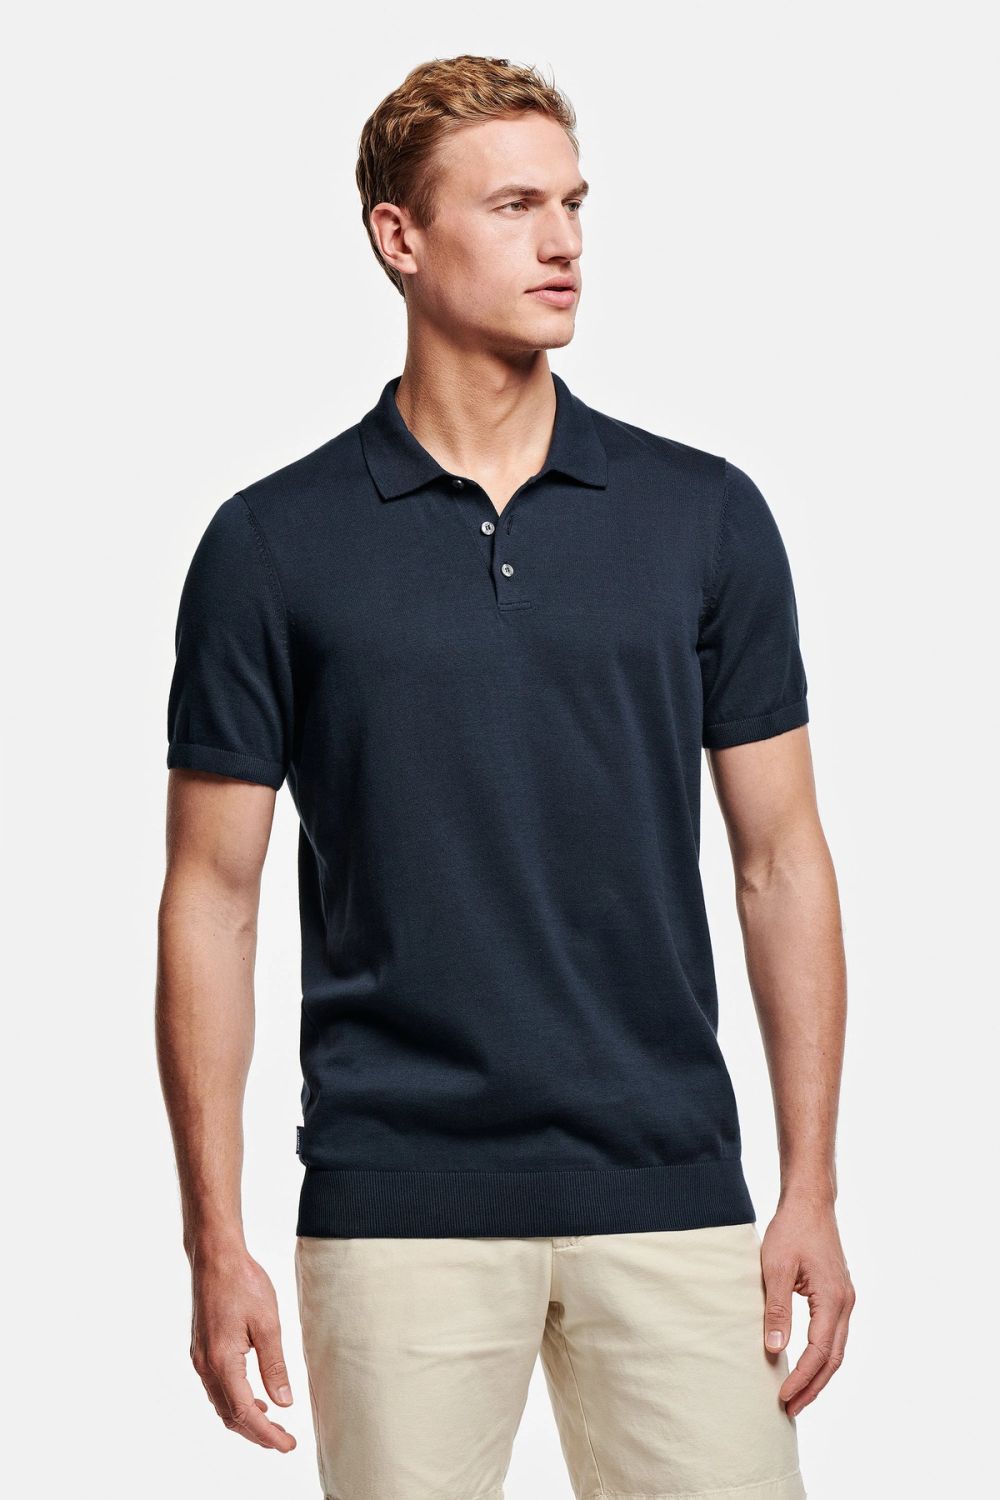 Cosmics * The Knitted Polo